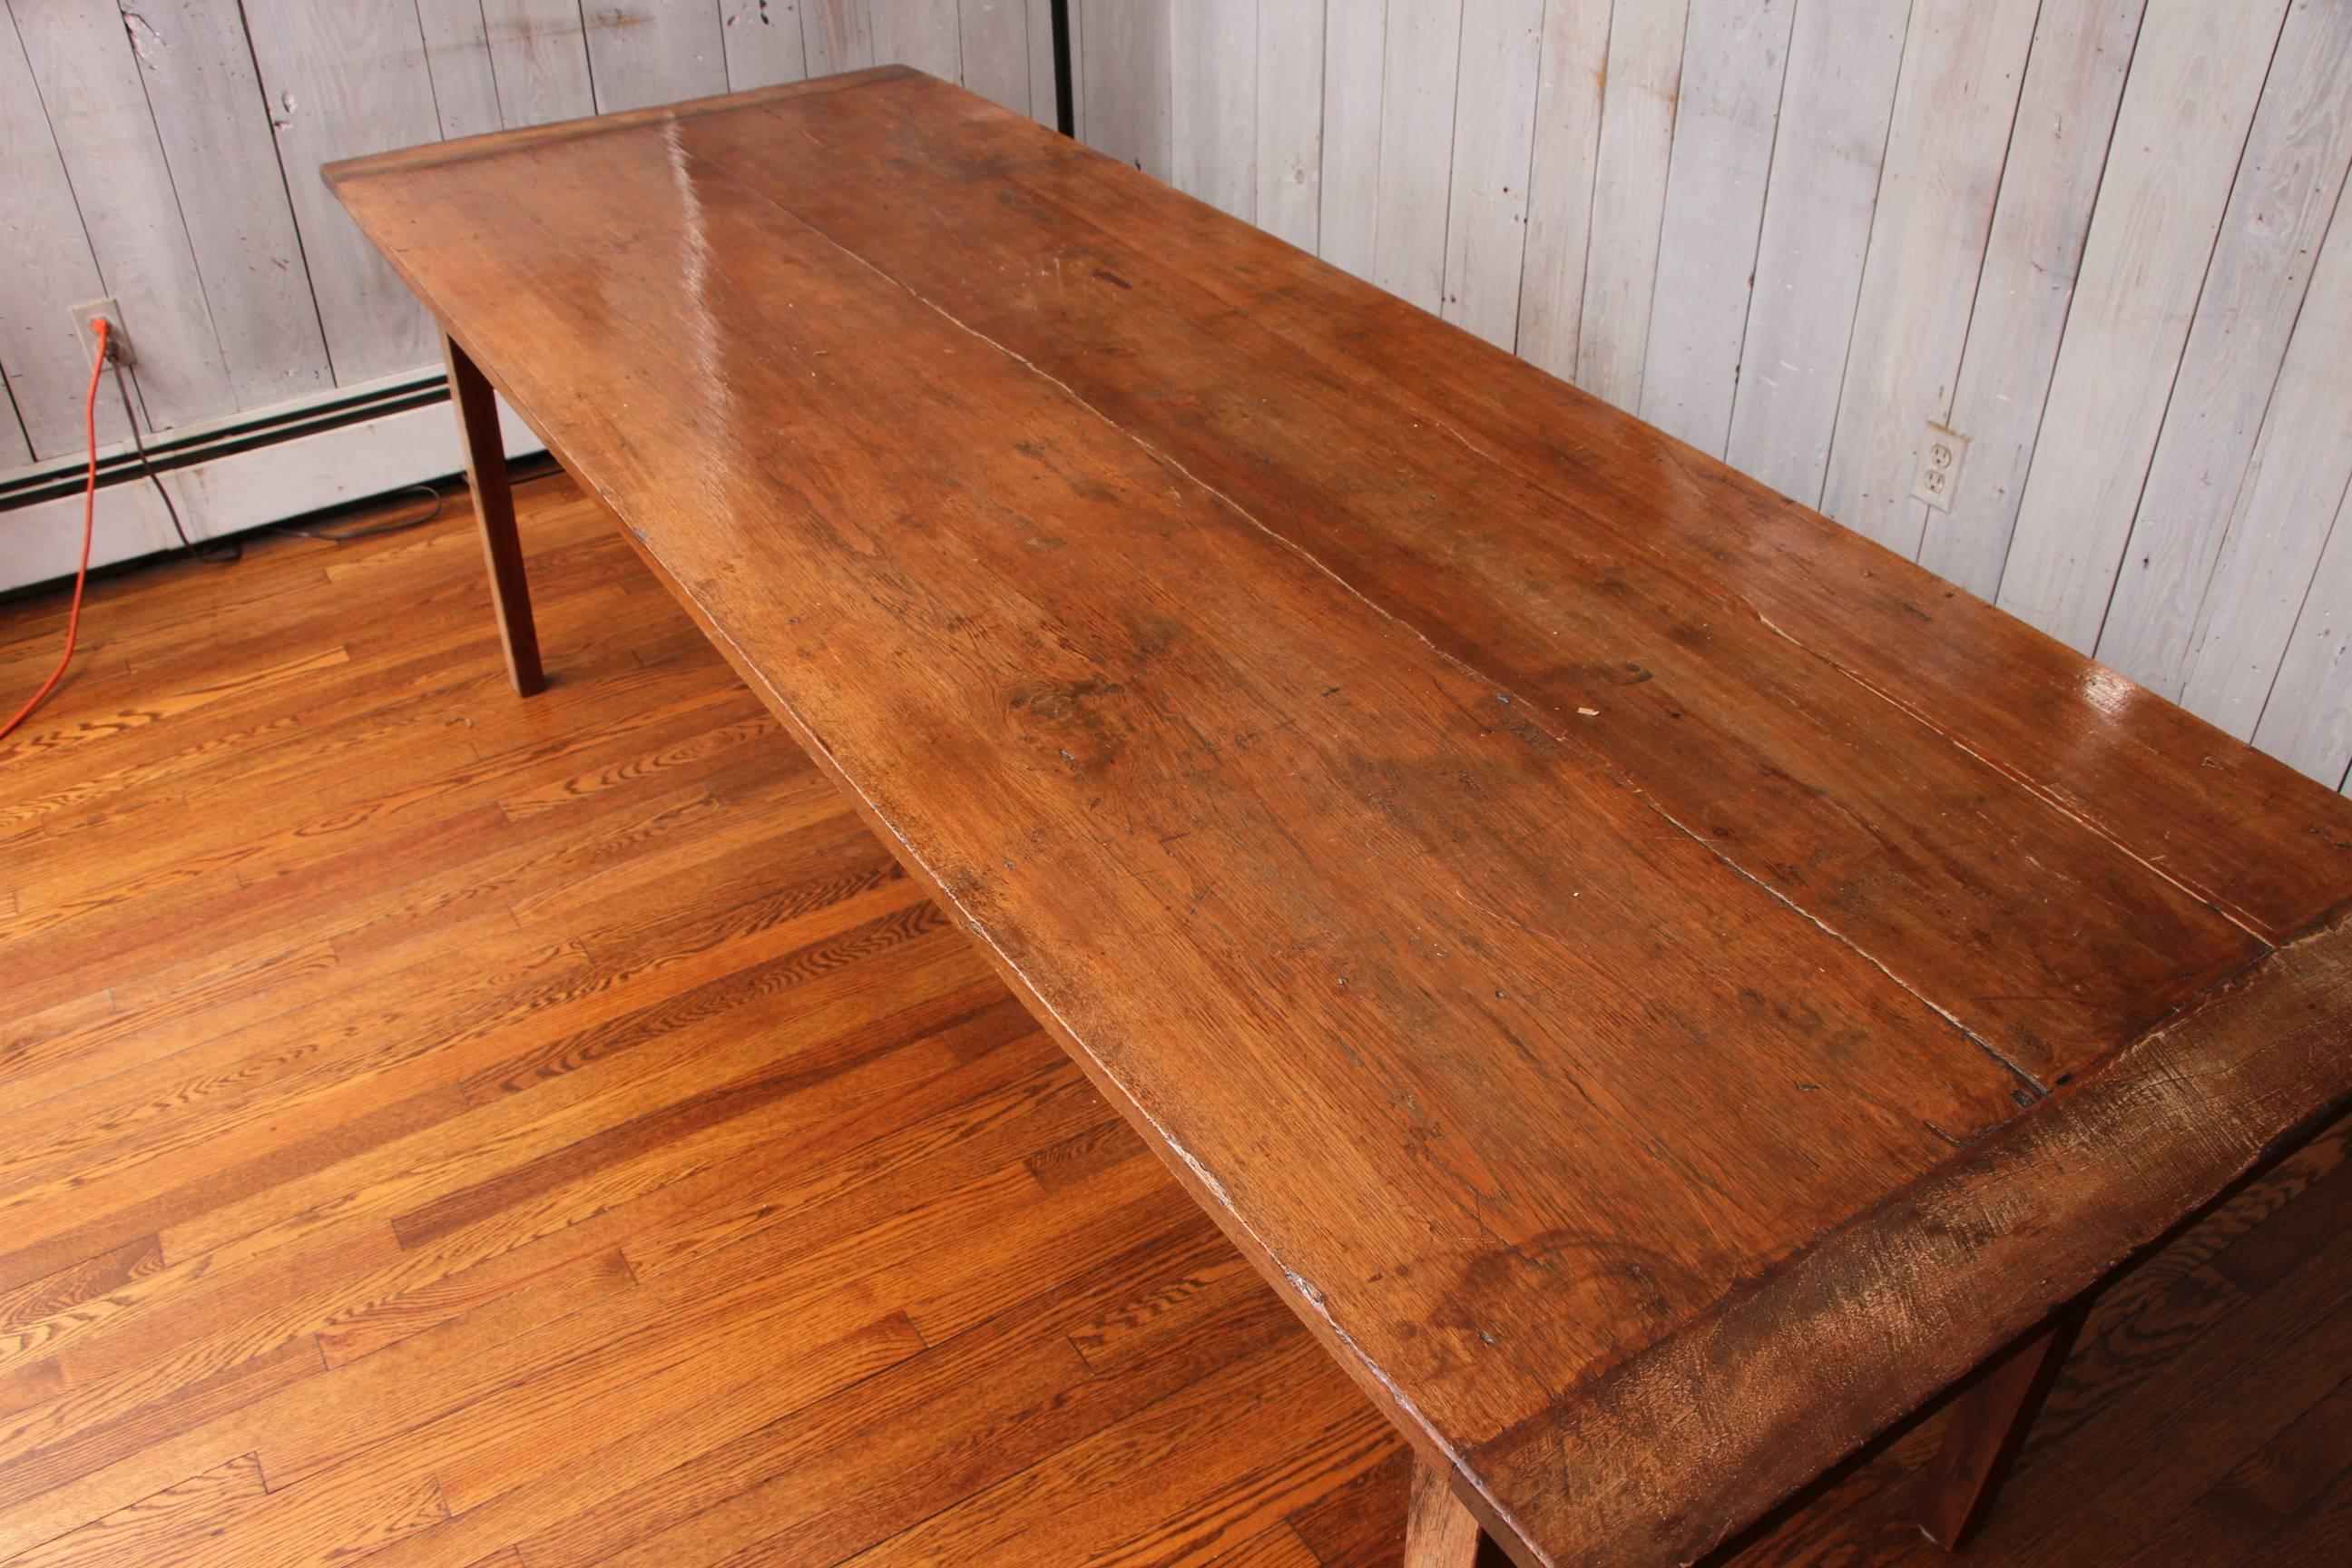 19th century farm dining table, walnut, overhanging rectangular plank top over pull out extension table, supported on square tapering legs, appears refinished.

Condition: Expected wear and signs of use consistent with age.